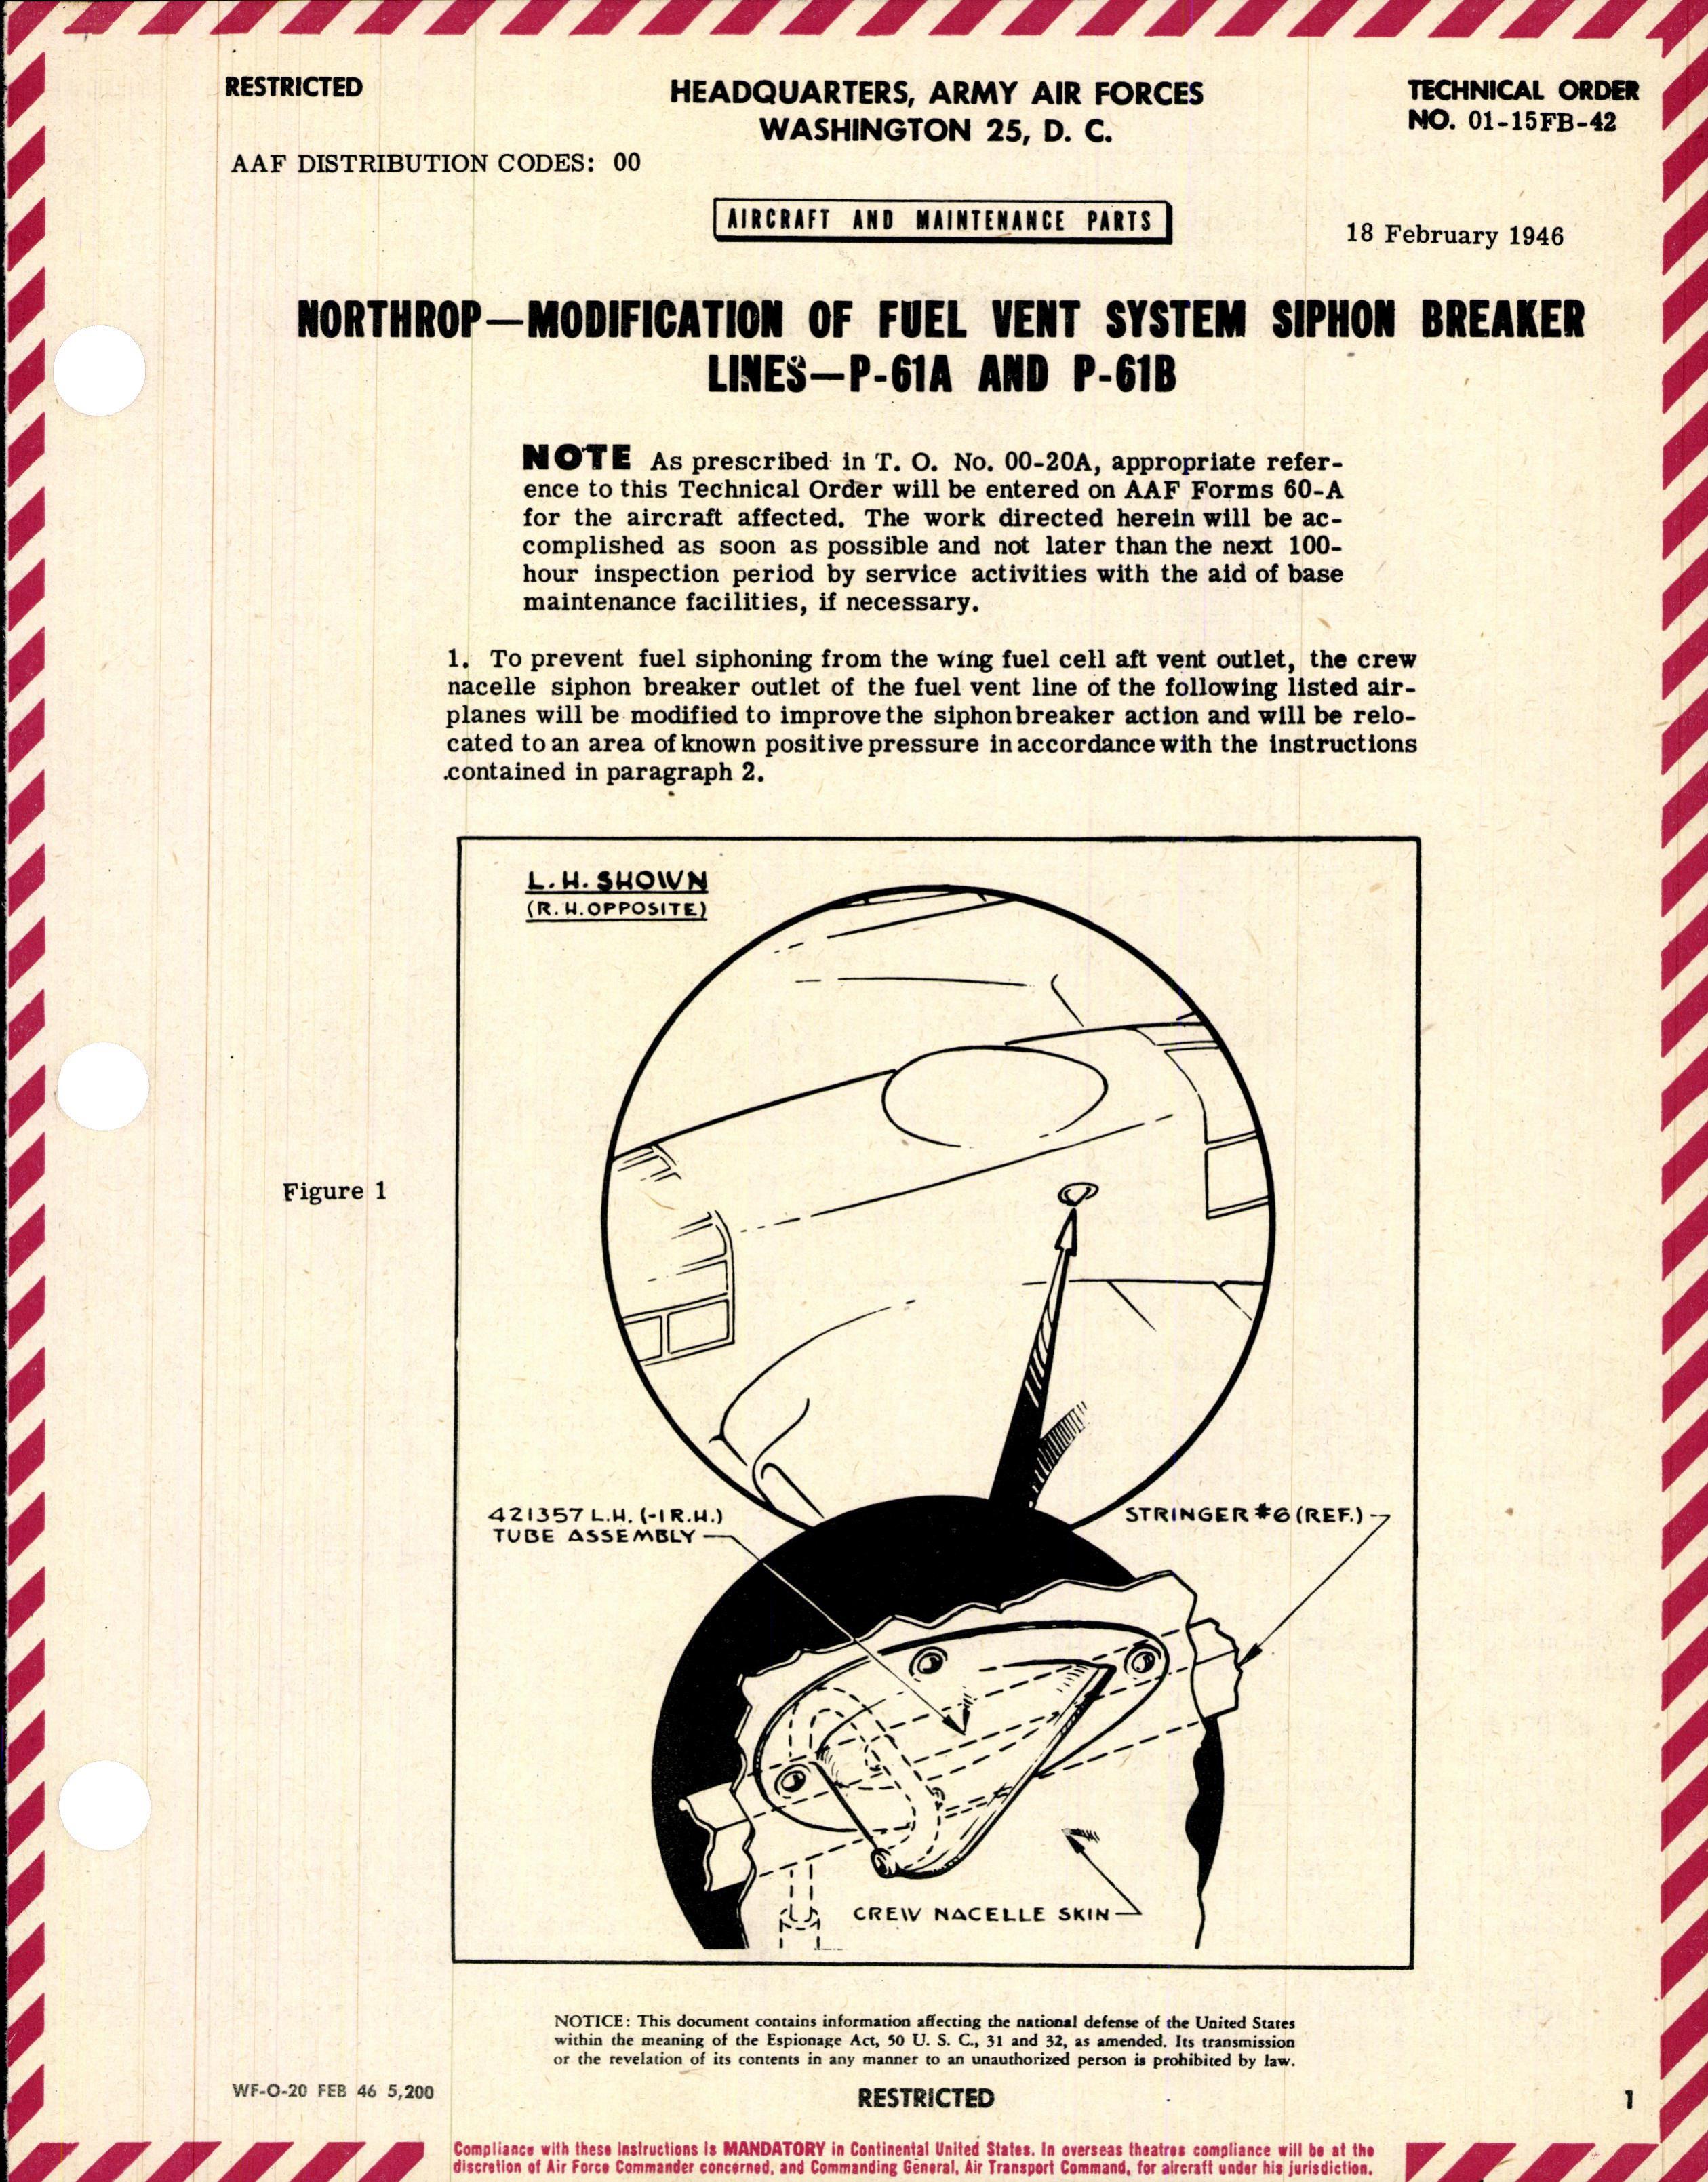 Sample page 1 from AirCorps Library document: Modification of Fuel Vent System Siphon Breaker Lines for P-61A and P-61B